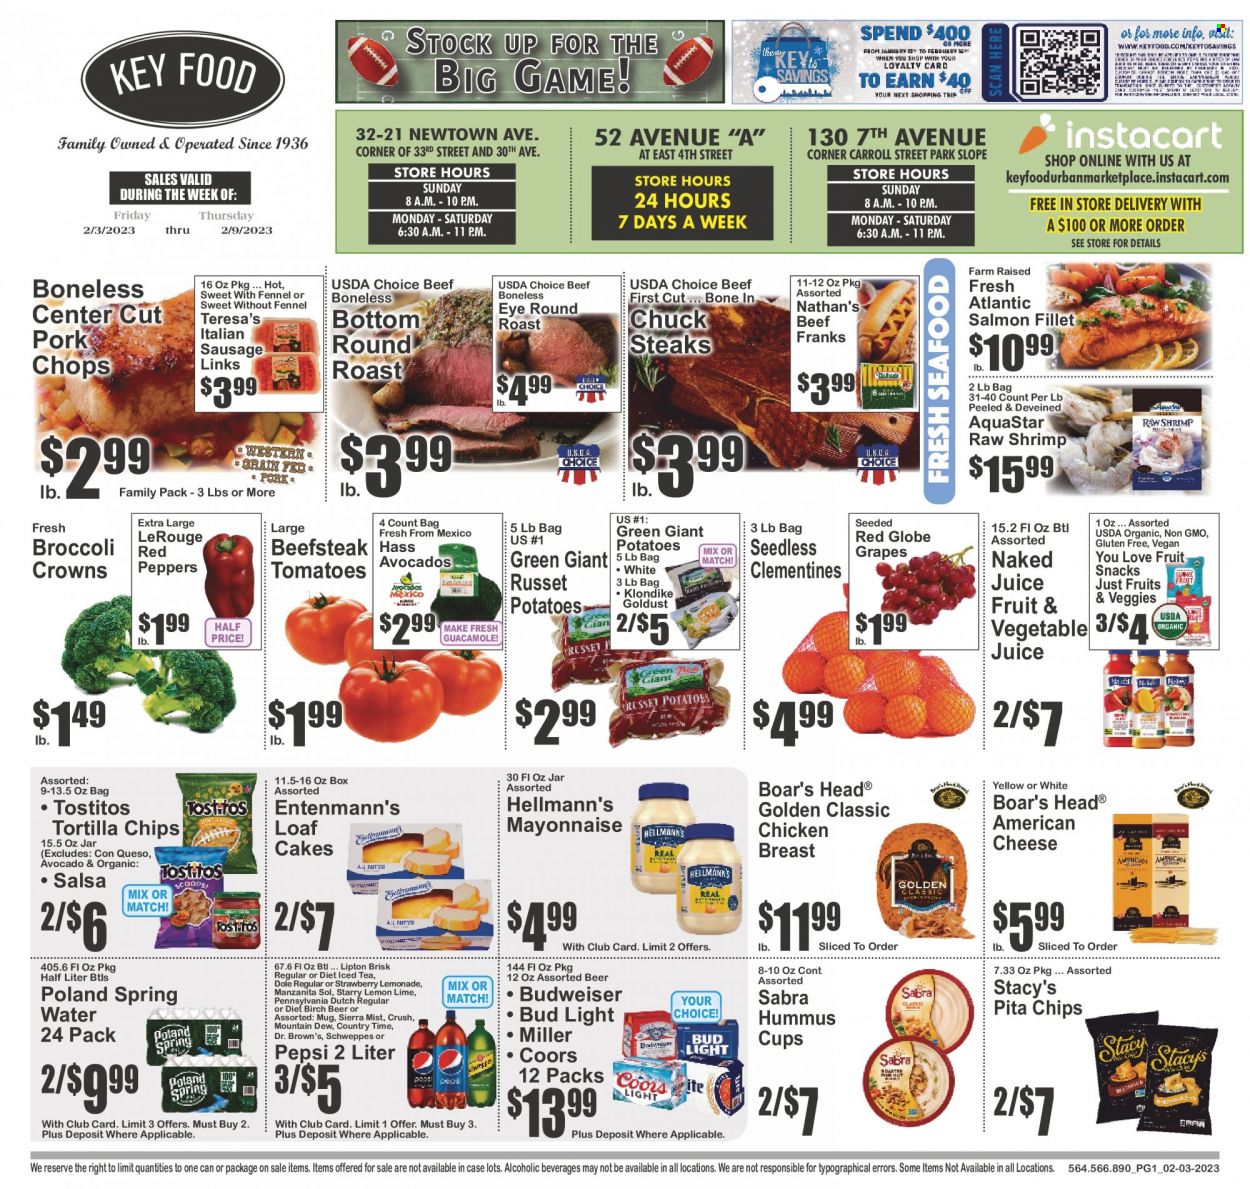 thumbnail - Key Food Flyer - 02/03/2023 - 02/09/2023 - Sales products - cake, Entenmann's, russet potatoes, tomatoes, potatoes, Dole, peppers, red peppers, grapes, Red Globe, salmon, salmon fillet, seafood, shrimps, sausage, italian sausage, hummus, guacamole, american cheese, cheese, mayonnaise, Hellmann’s, fruit snack, tortilla chips, chips, Tostitos, pita chips, fennel, salsa, lemonade, Mountain Dew, Schweppes, Pepsi, juice, Lipton, ice tea, Dr. Brown's, Sierra Mist, Country Time, spring water, beer, Bud Light, Miller, Sol, chicken breasts, beef meat, steak, round roast, pork chops, pork meat, mug, cup, Budweiser, clementines, Coors. Page 1.